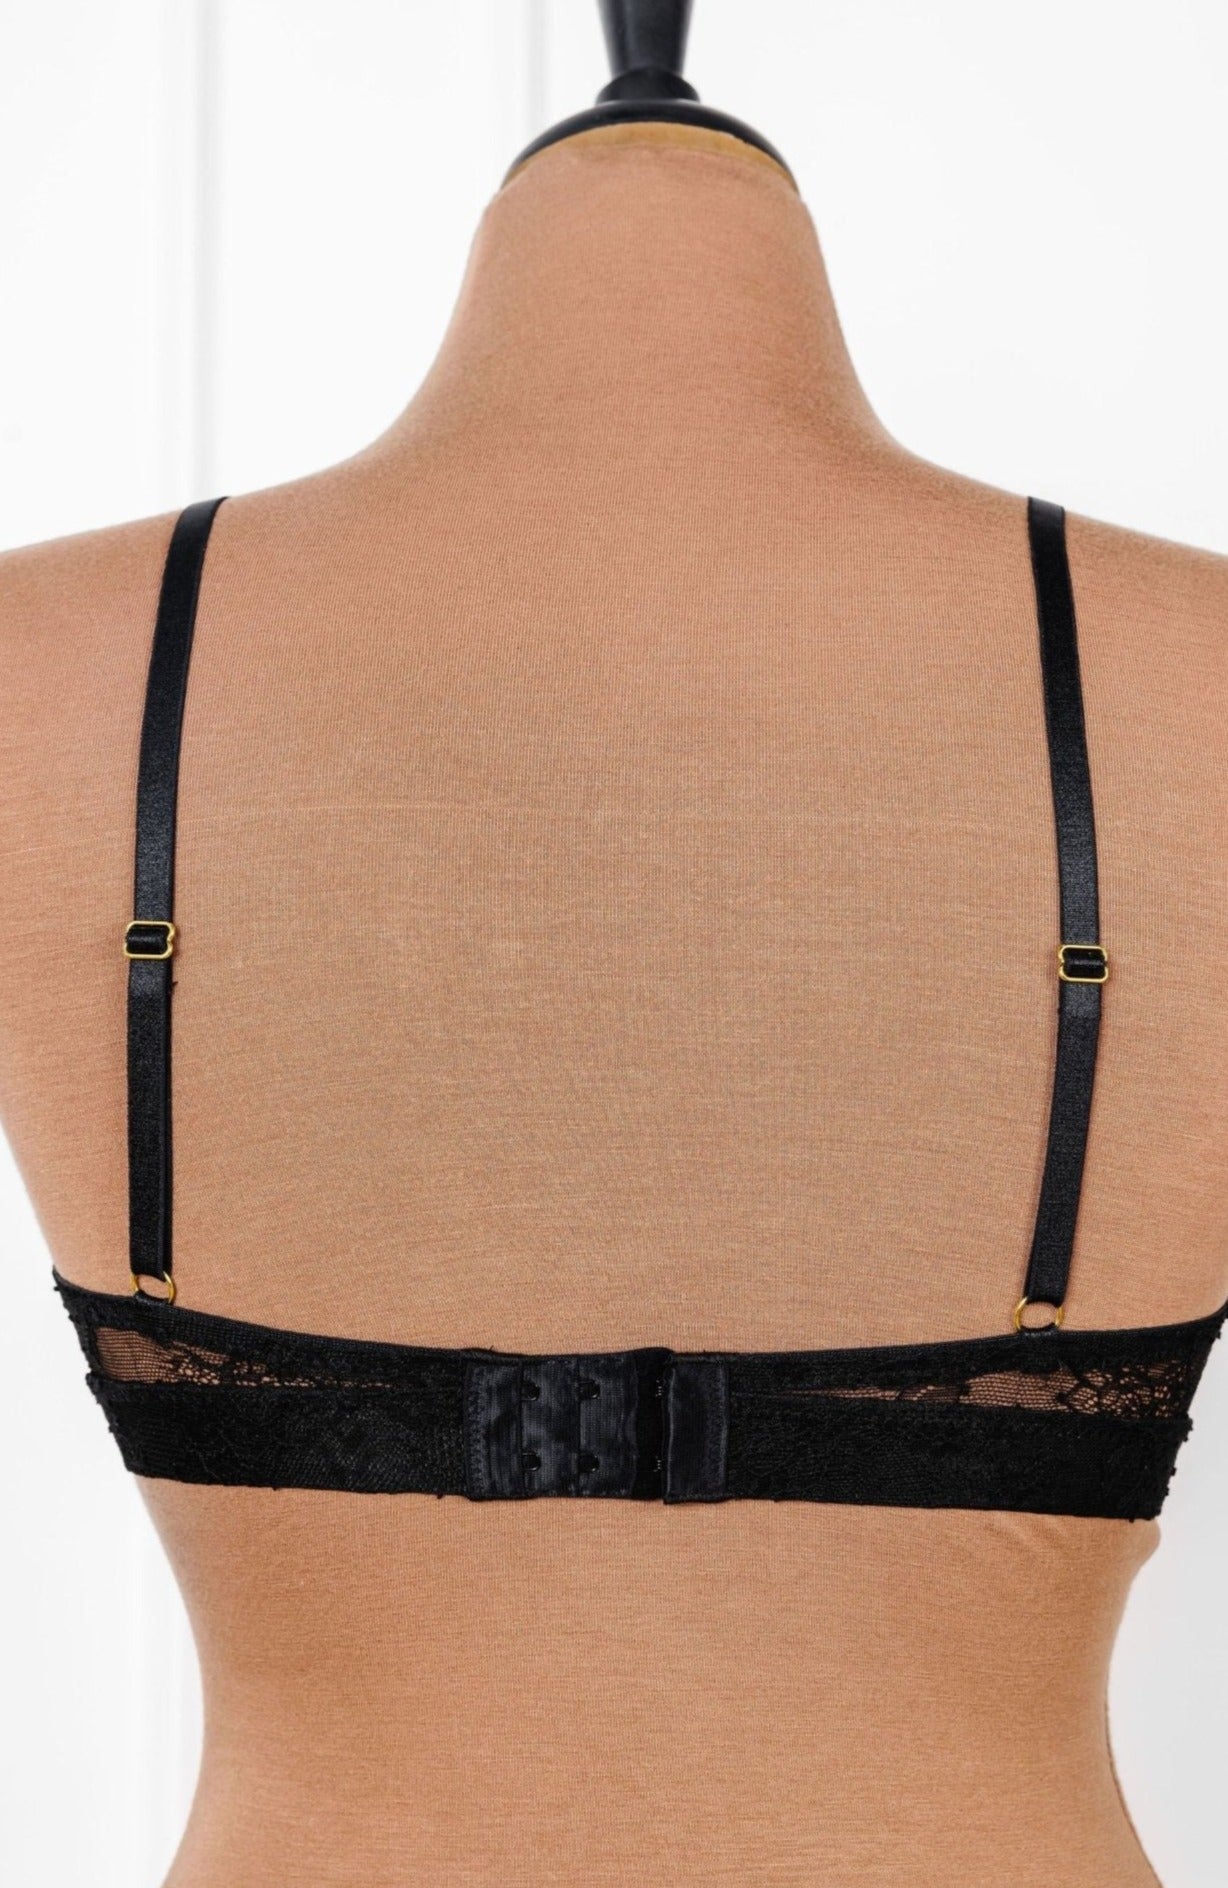 Lacy Caged Cupless Bralette - Black - Mentionables